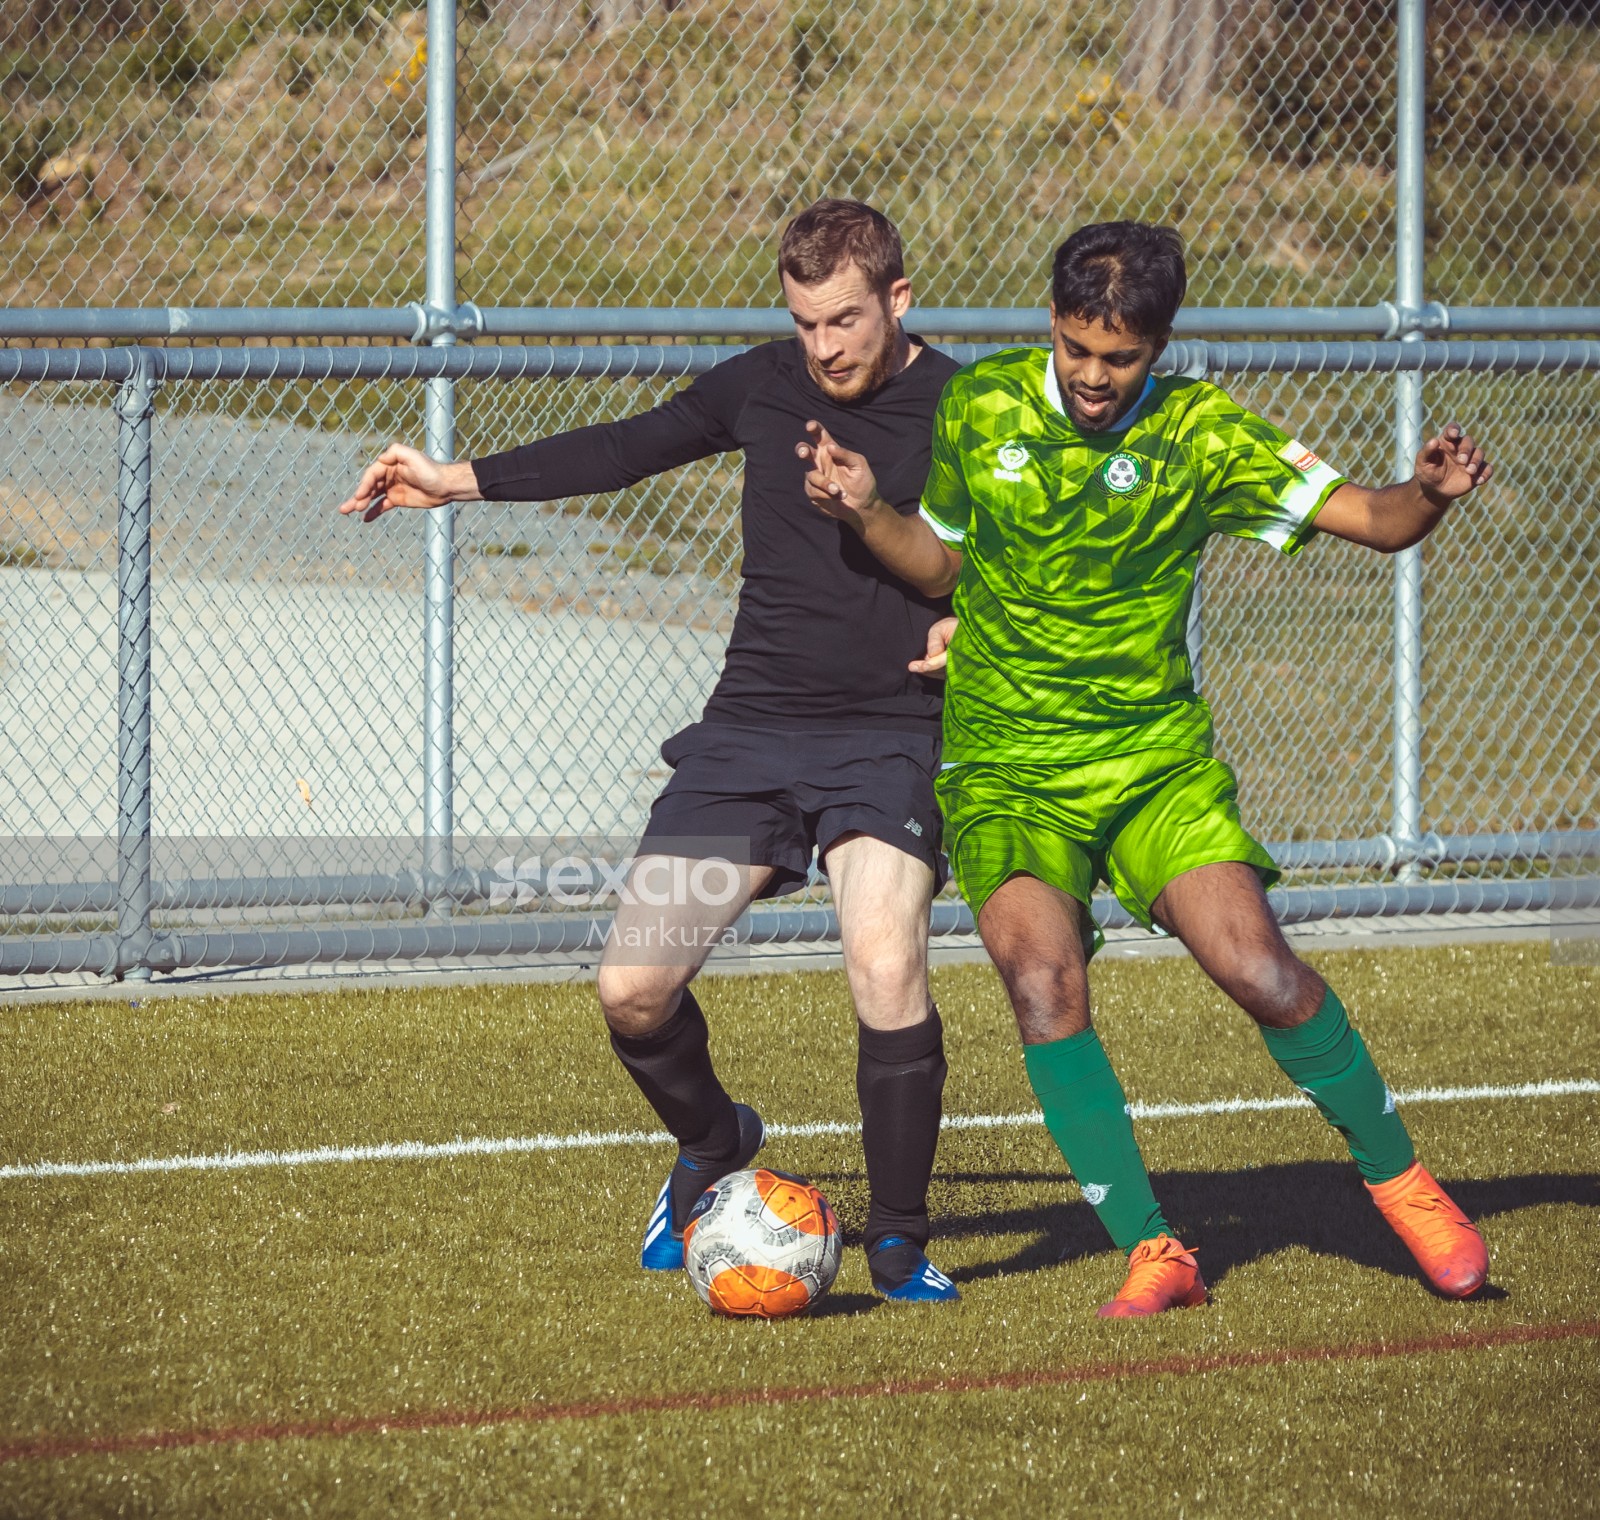 Nadi FC player trying to tackle his opponent - Sports Zone sunday league